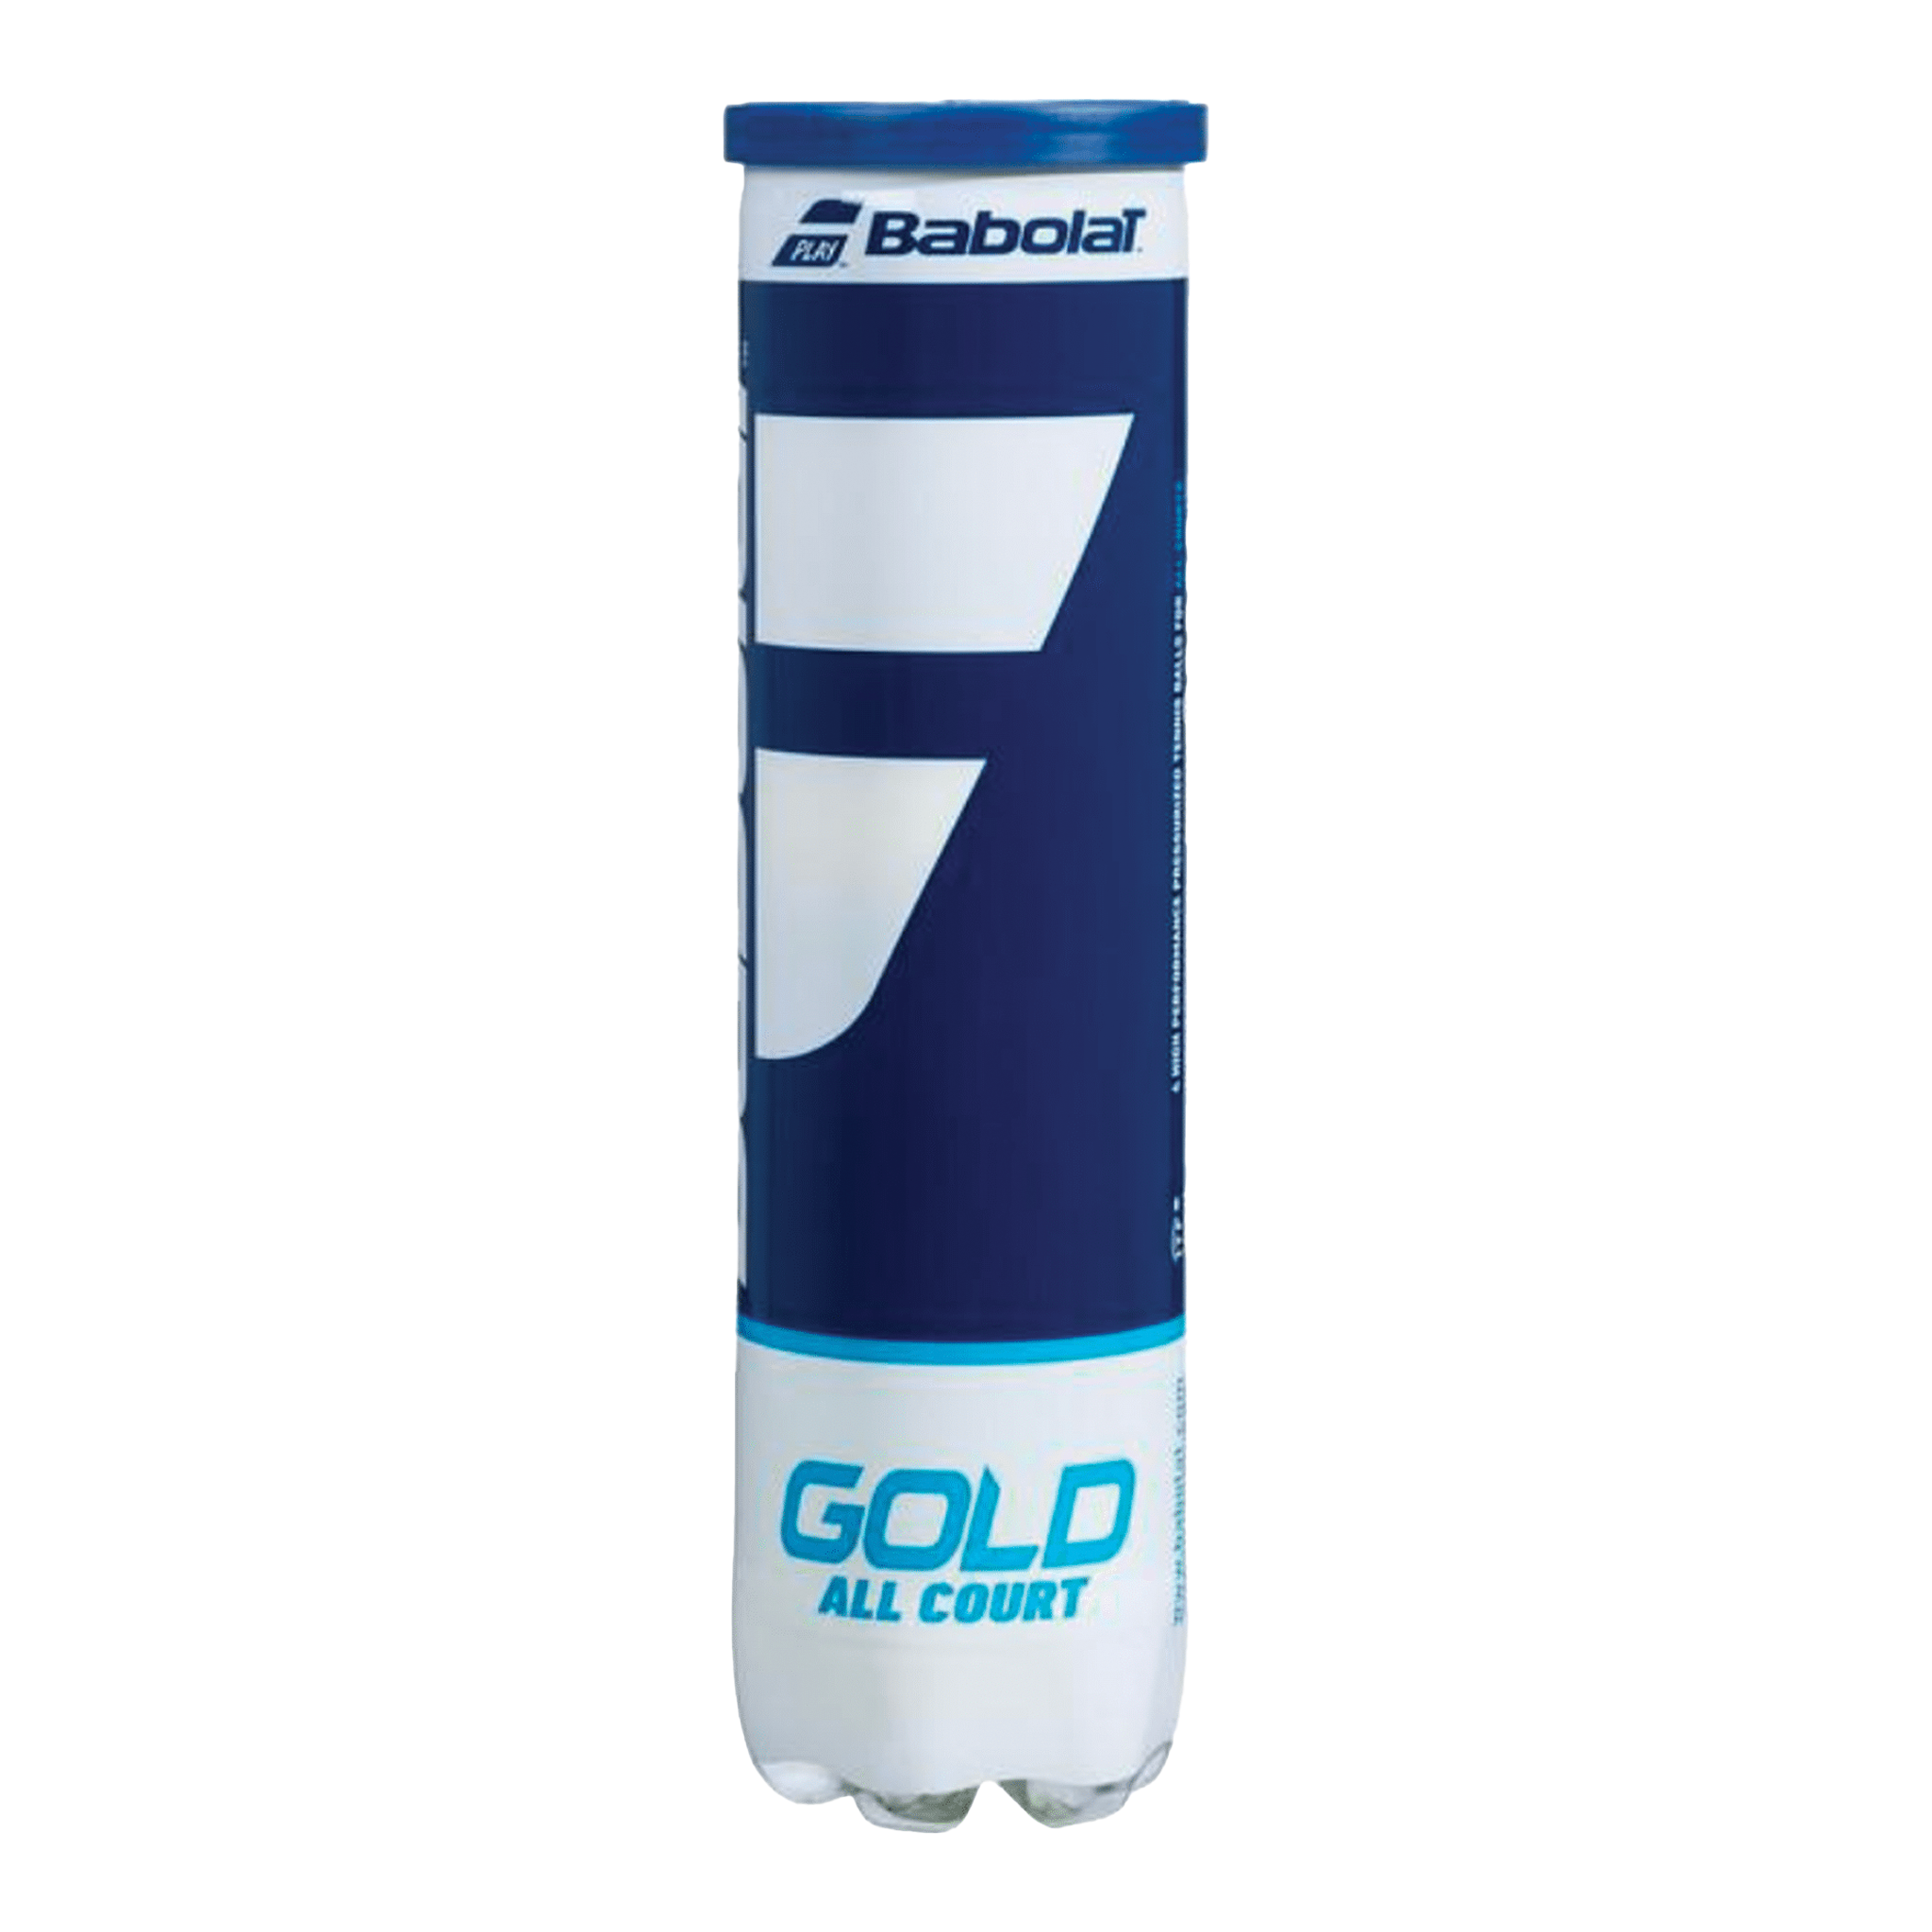 Babolat Gold All Court